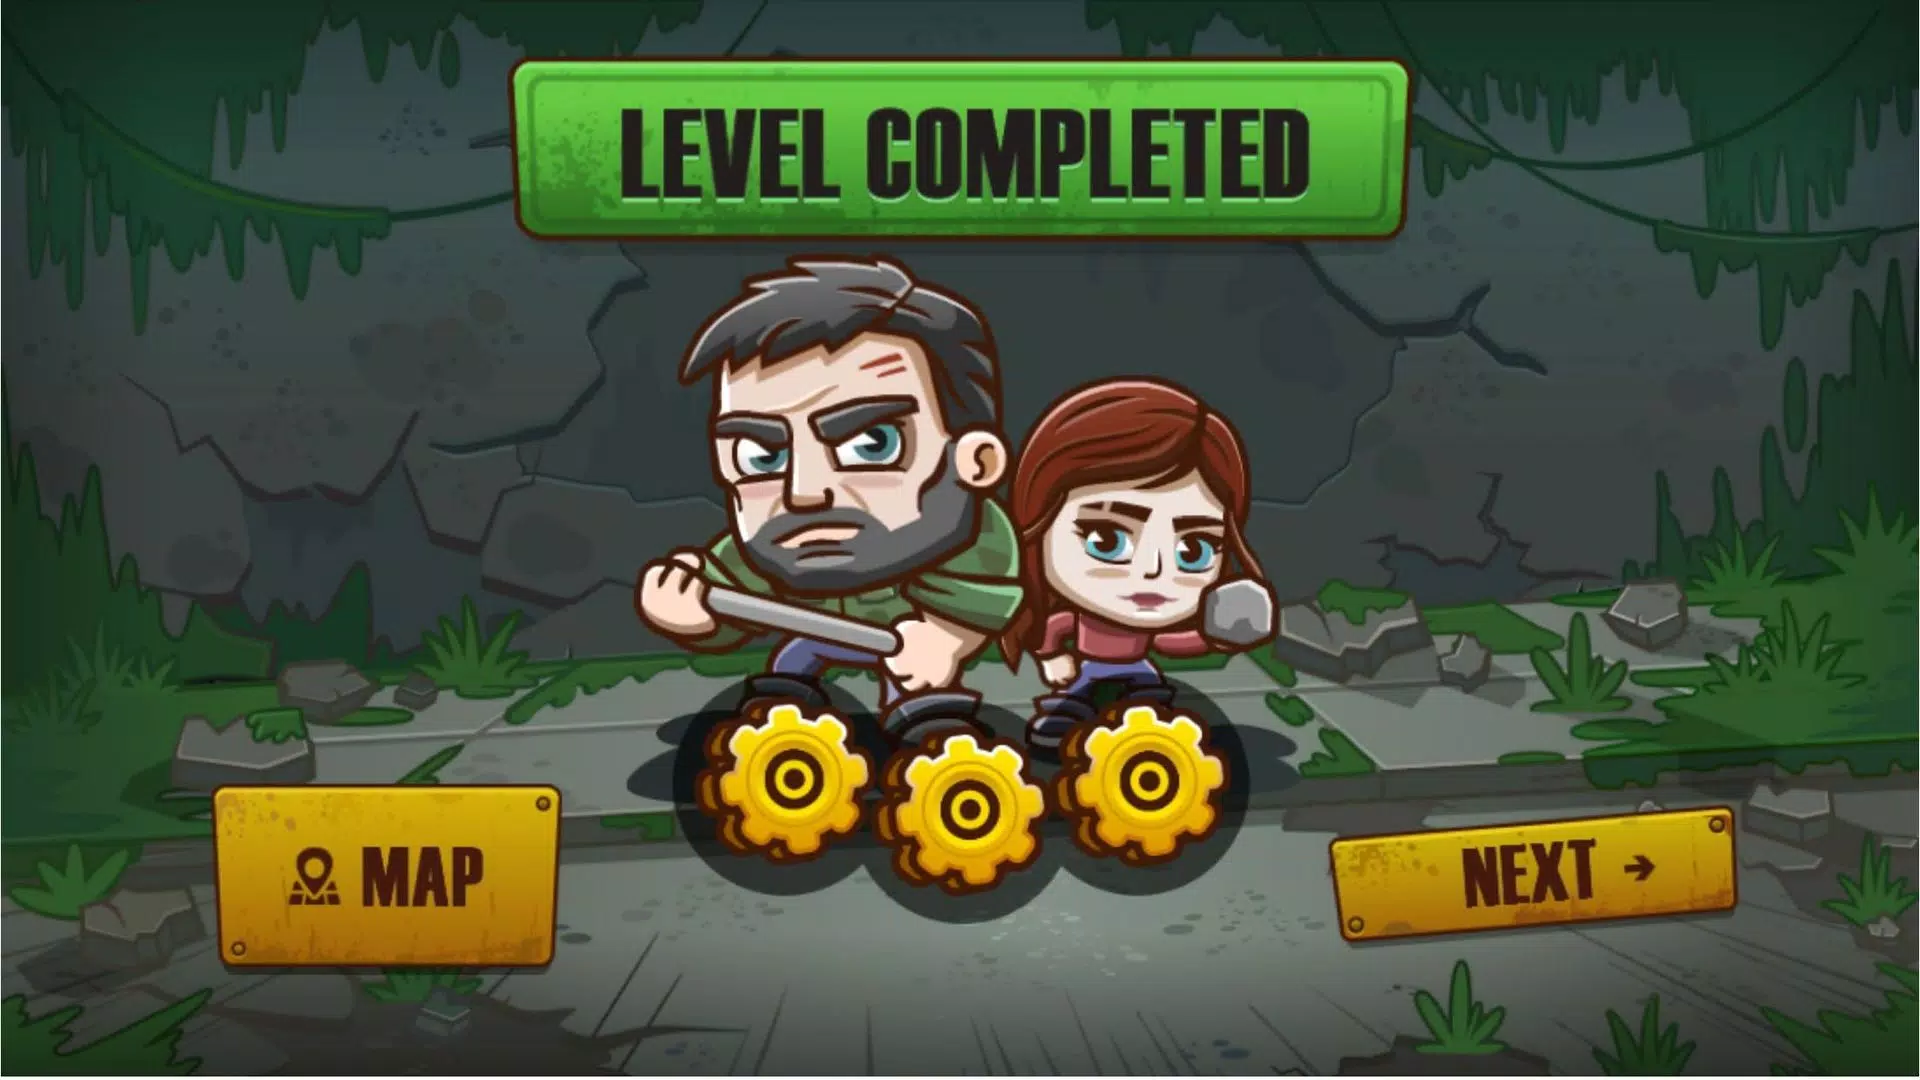 DUO SURVIVAL 2 - Play Online for Free!